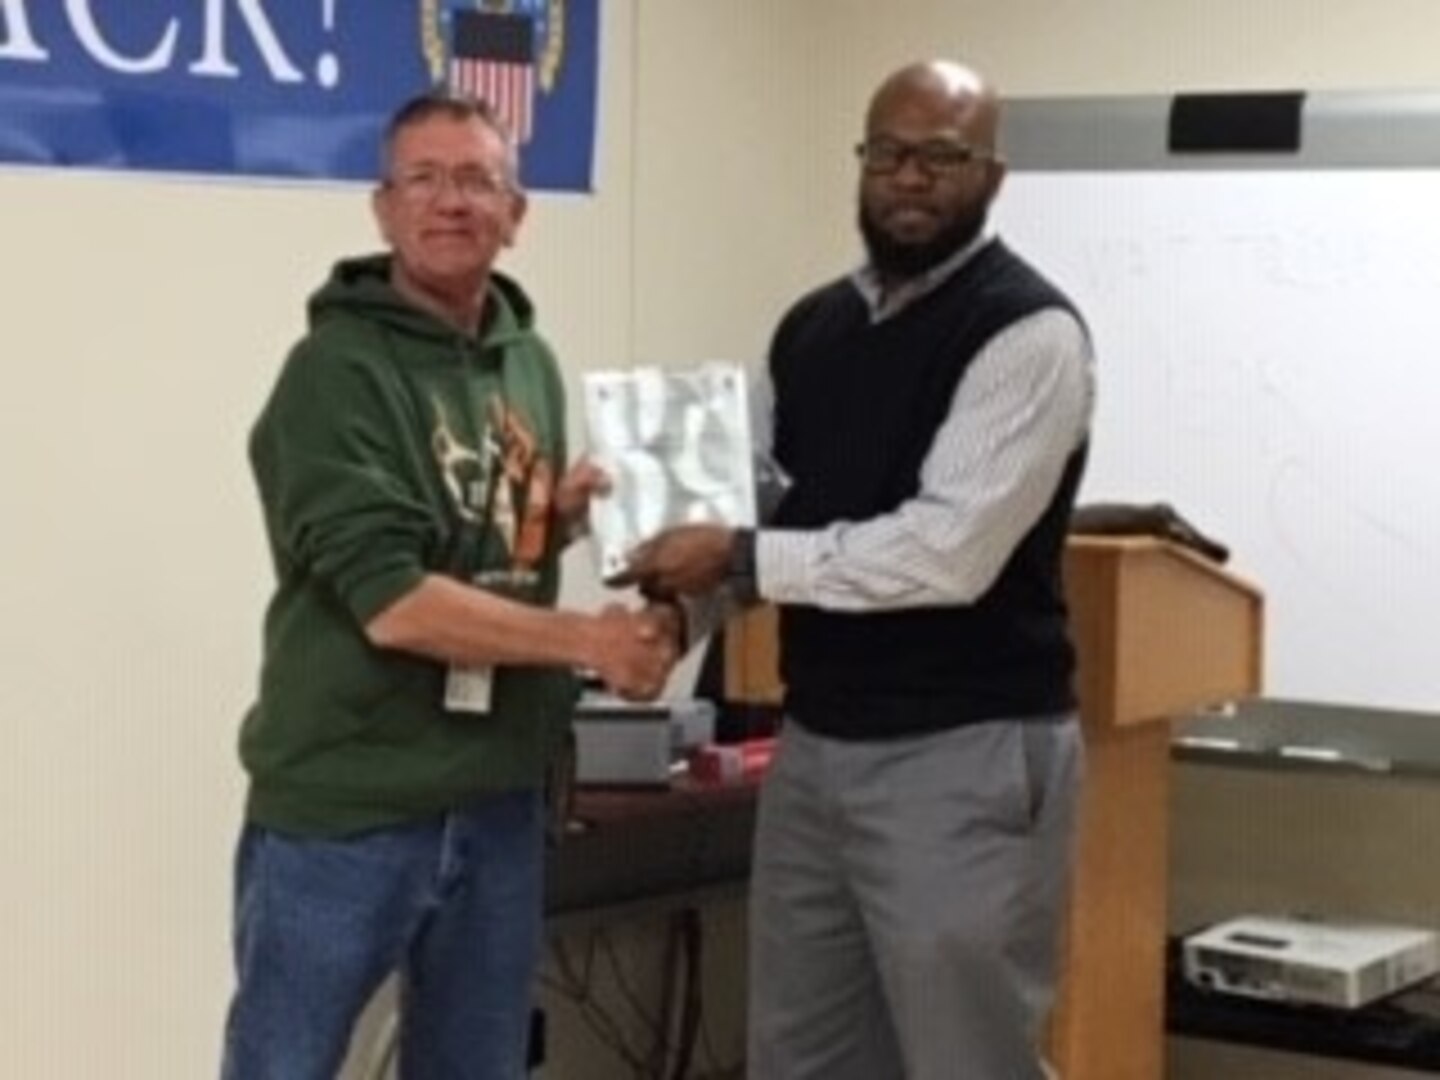 Operations Chief Willie Mitchell presents Disposal Service Representative Dave Smith with a plaque from Veterans Administration for helping the agency find usable items to aid homeless vets.